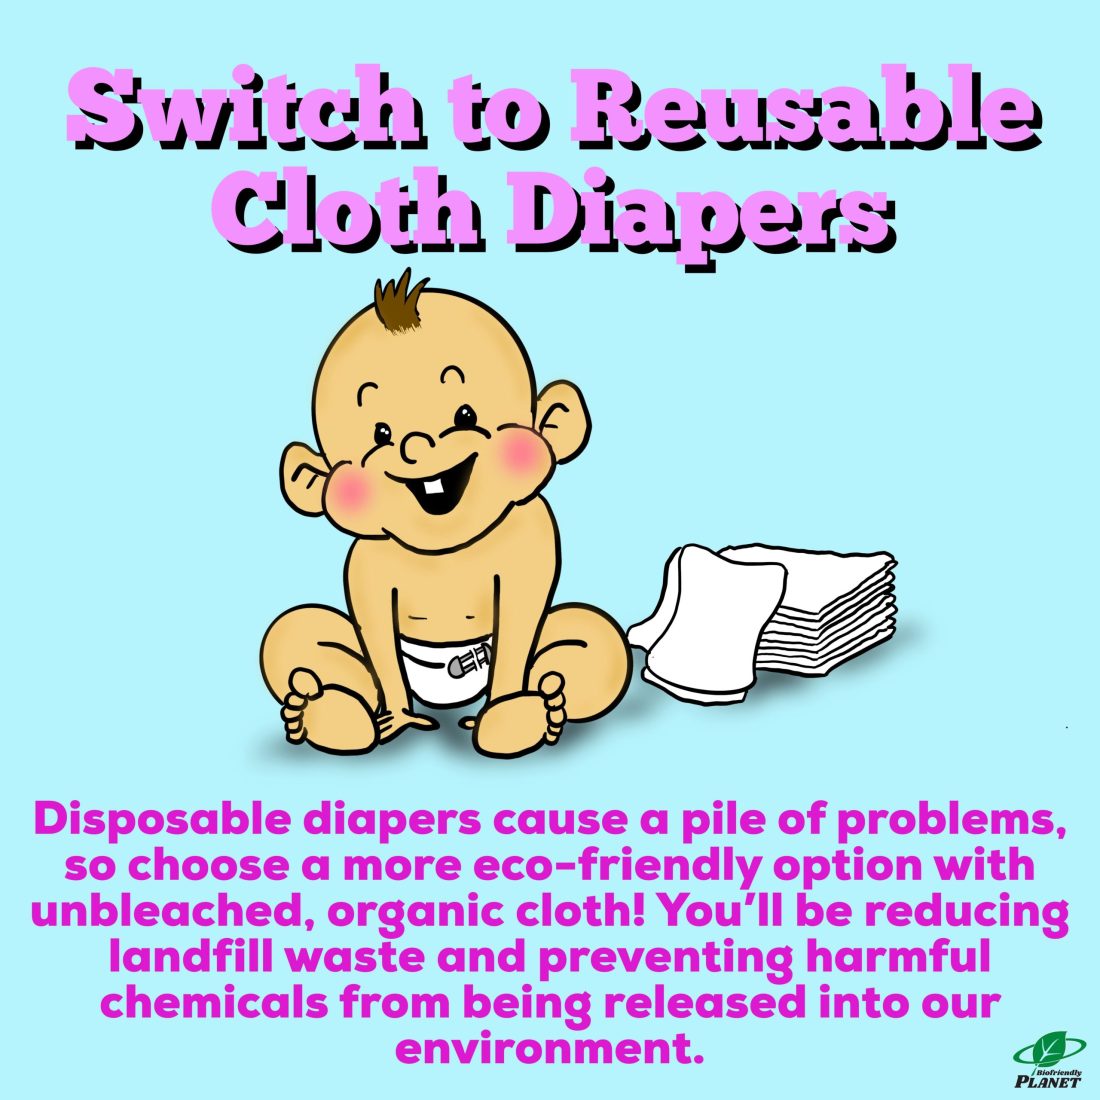 Switch to Reusable Cloth Diapers | Tuesday Tip